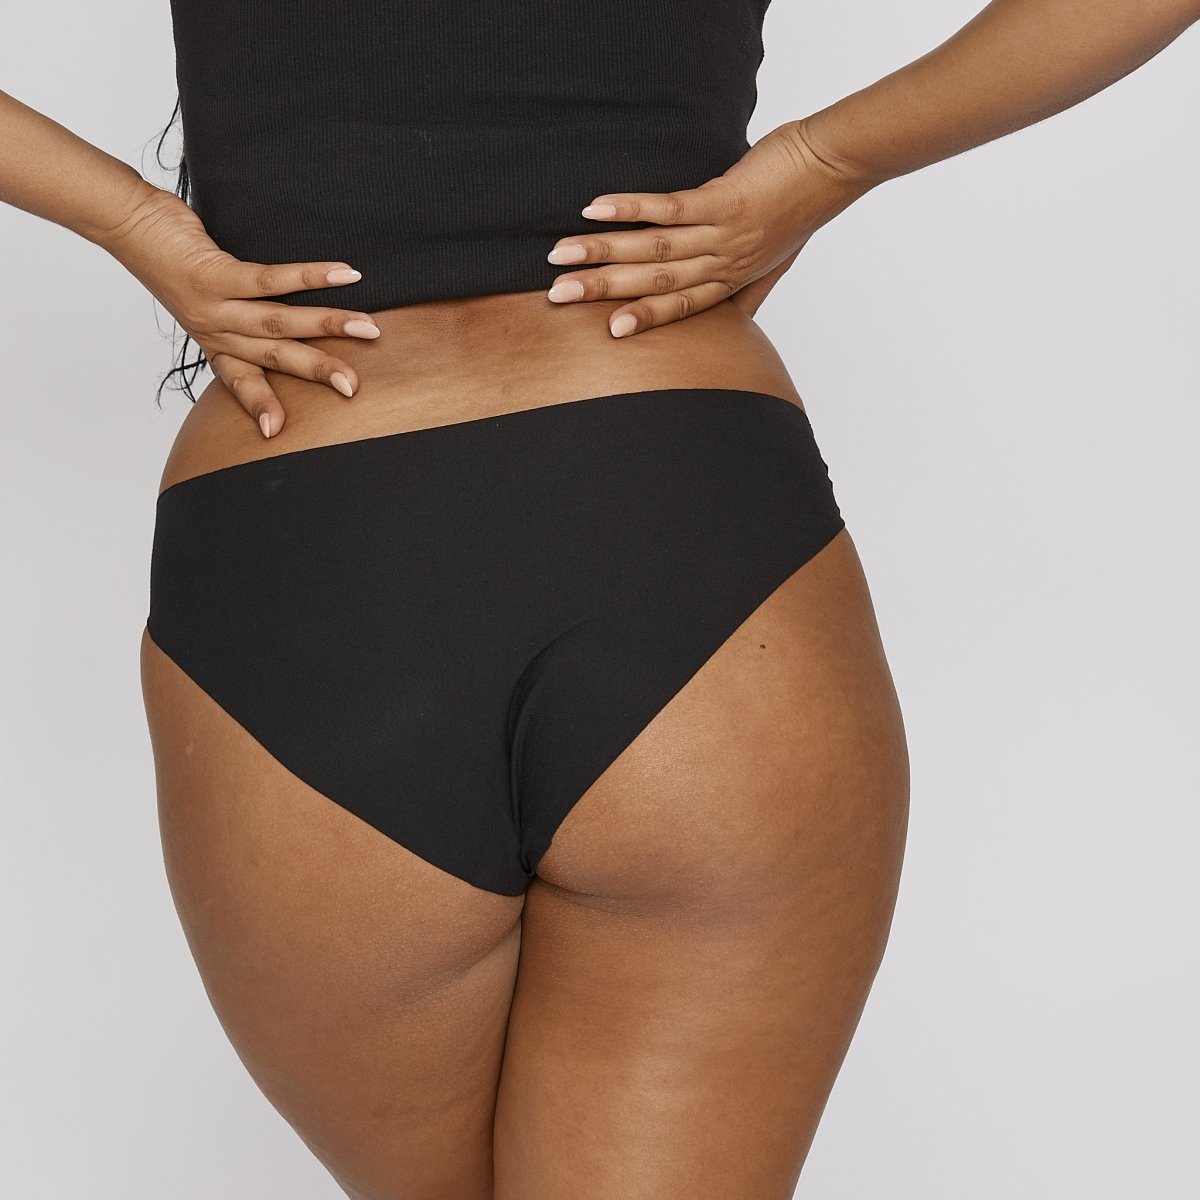 Seamless, Invisible, Everyday Underwear for Women